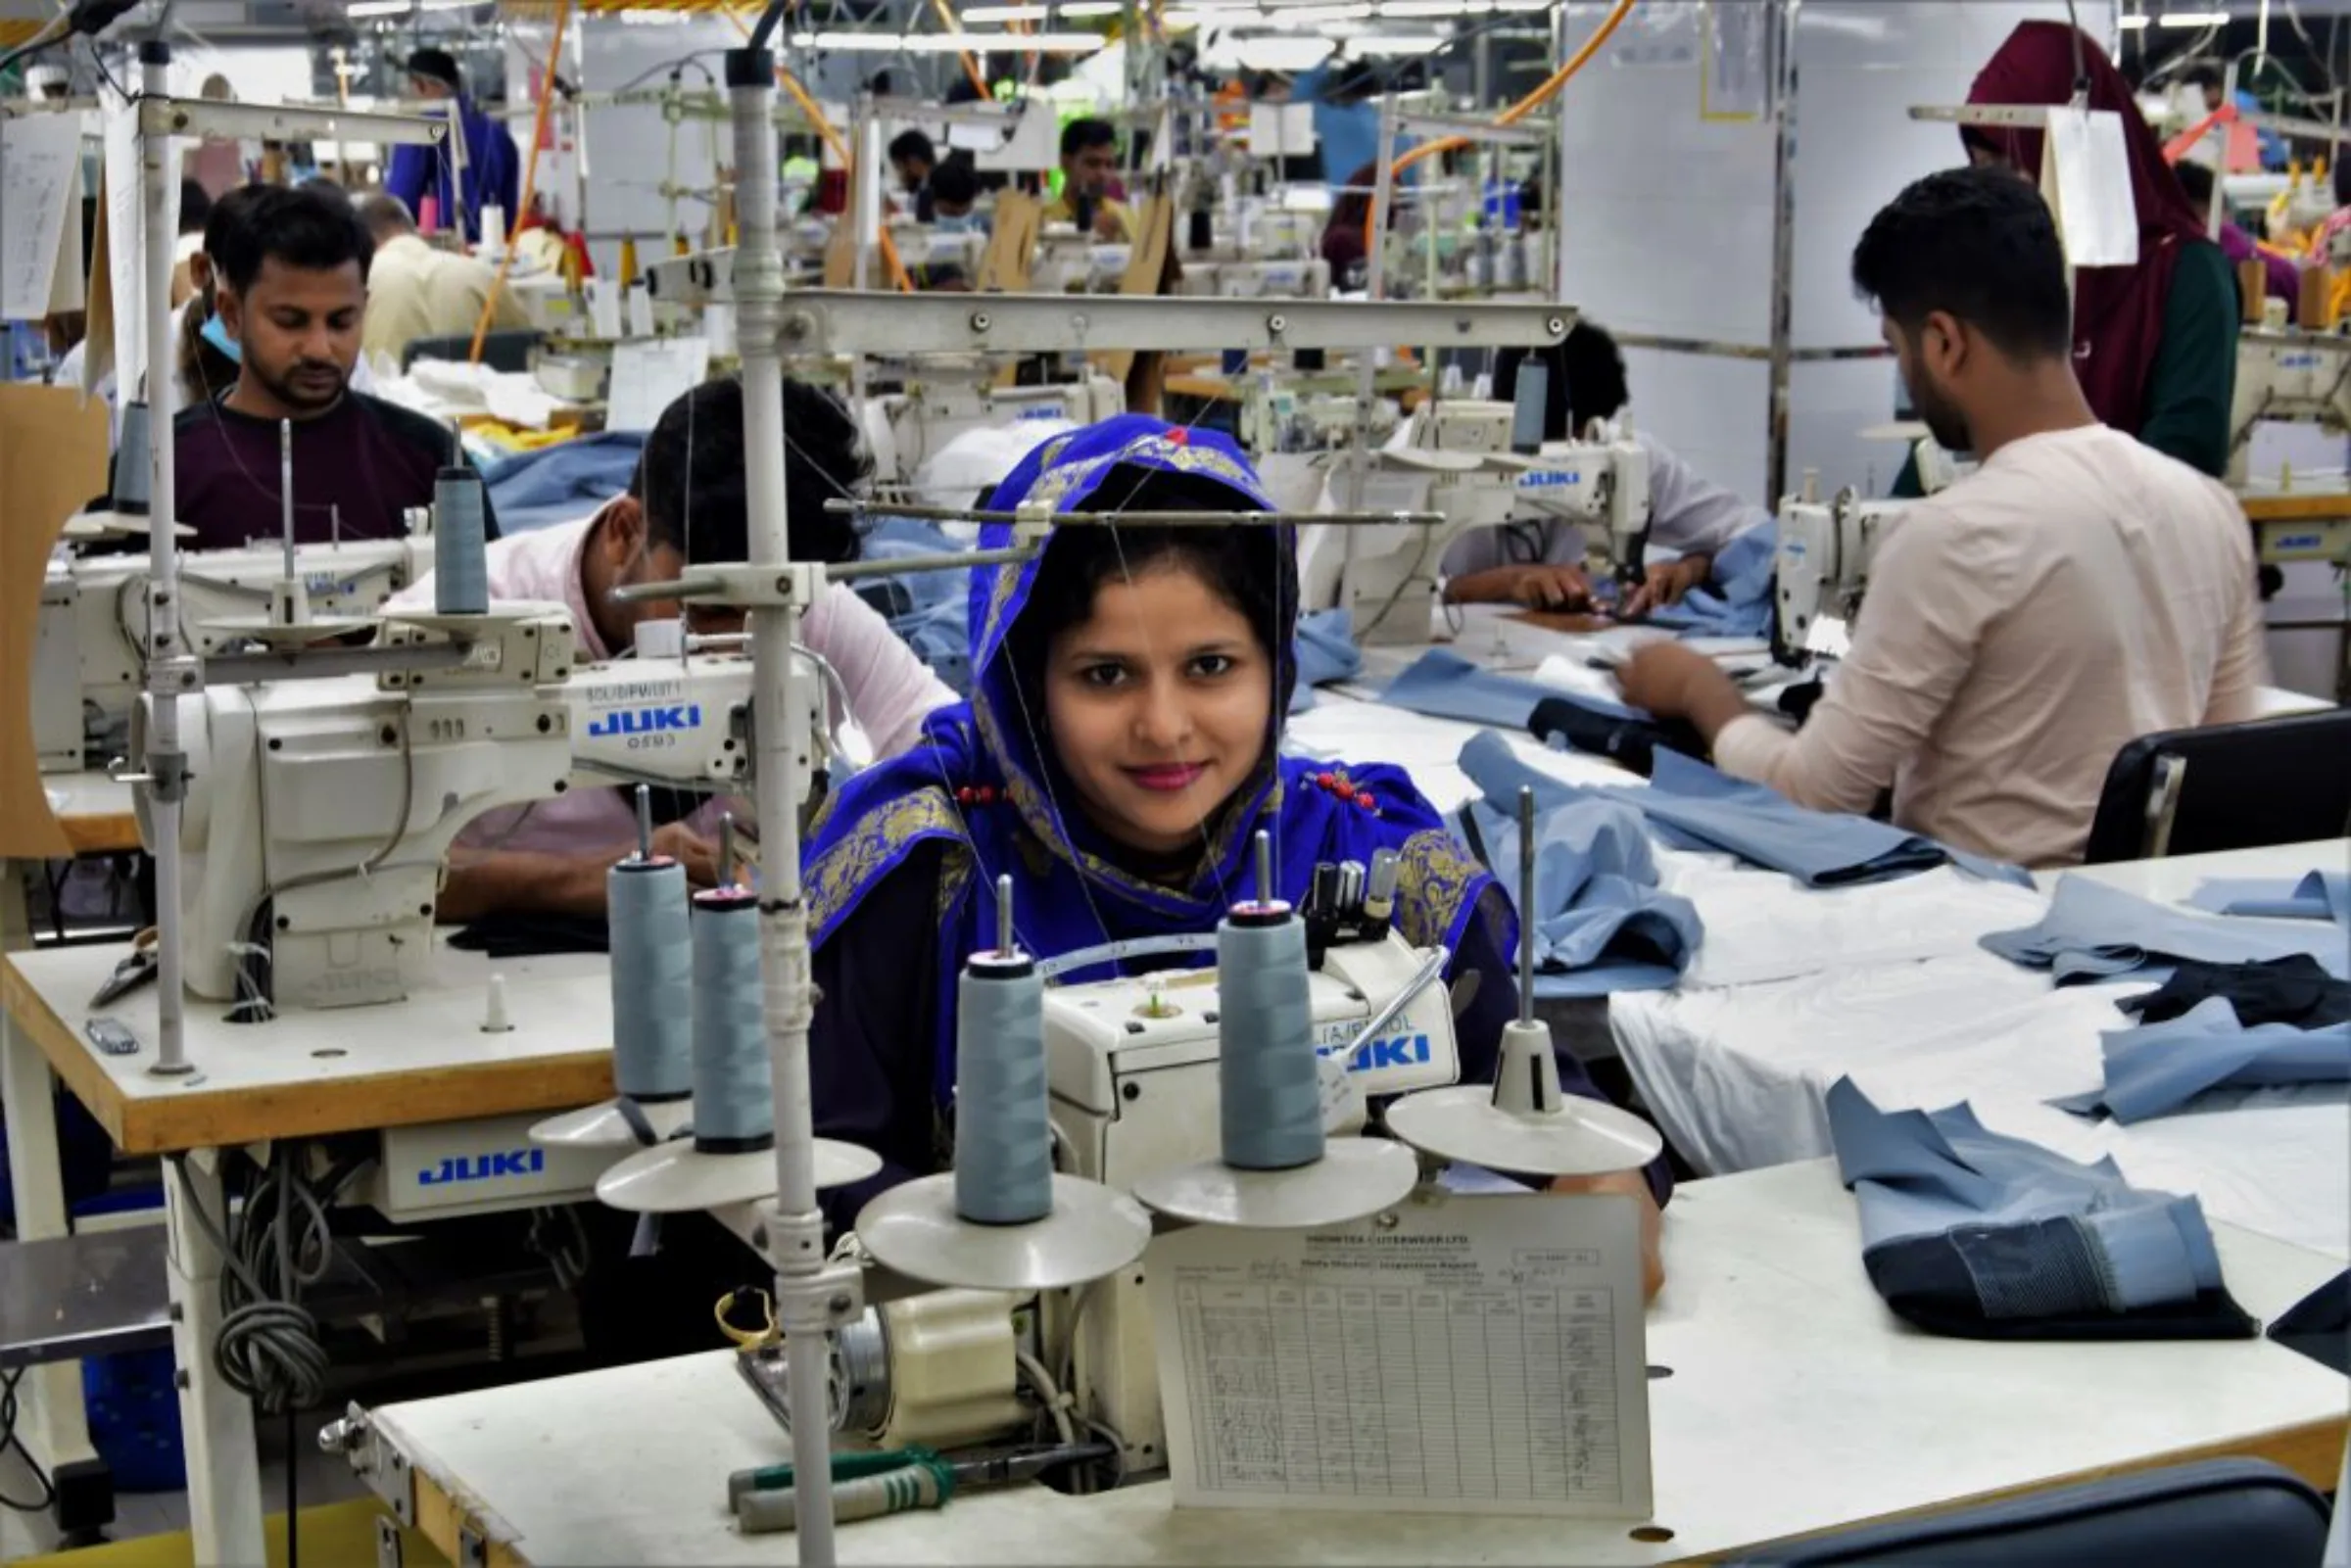 Sathi Begum works at a Snowtex Outerware garment factory in Dhamrai, Bangladesh, January 30, 2023